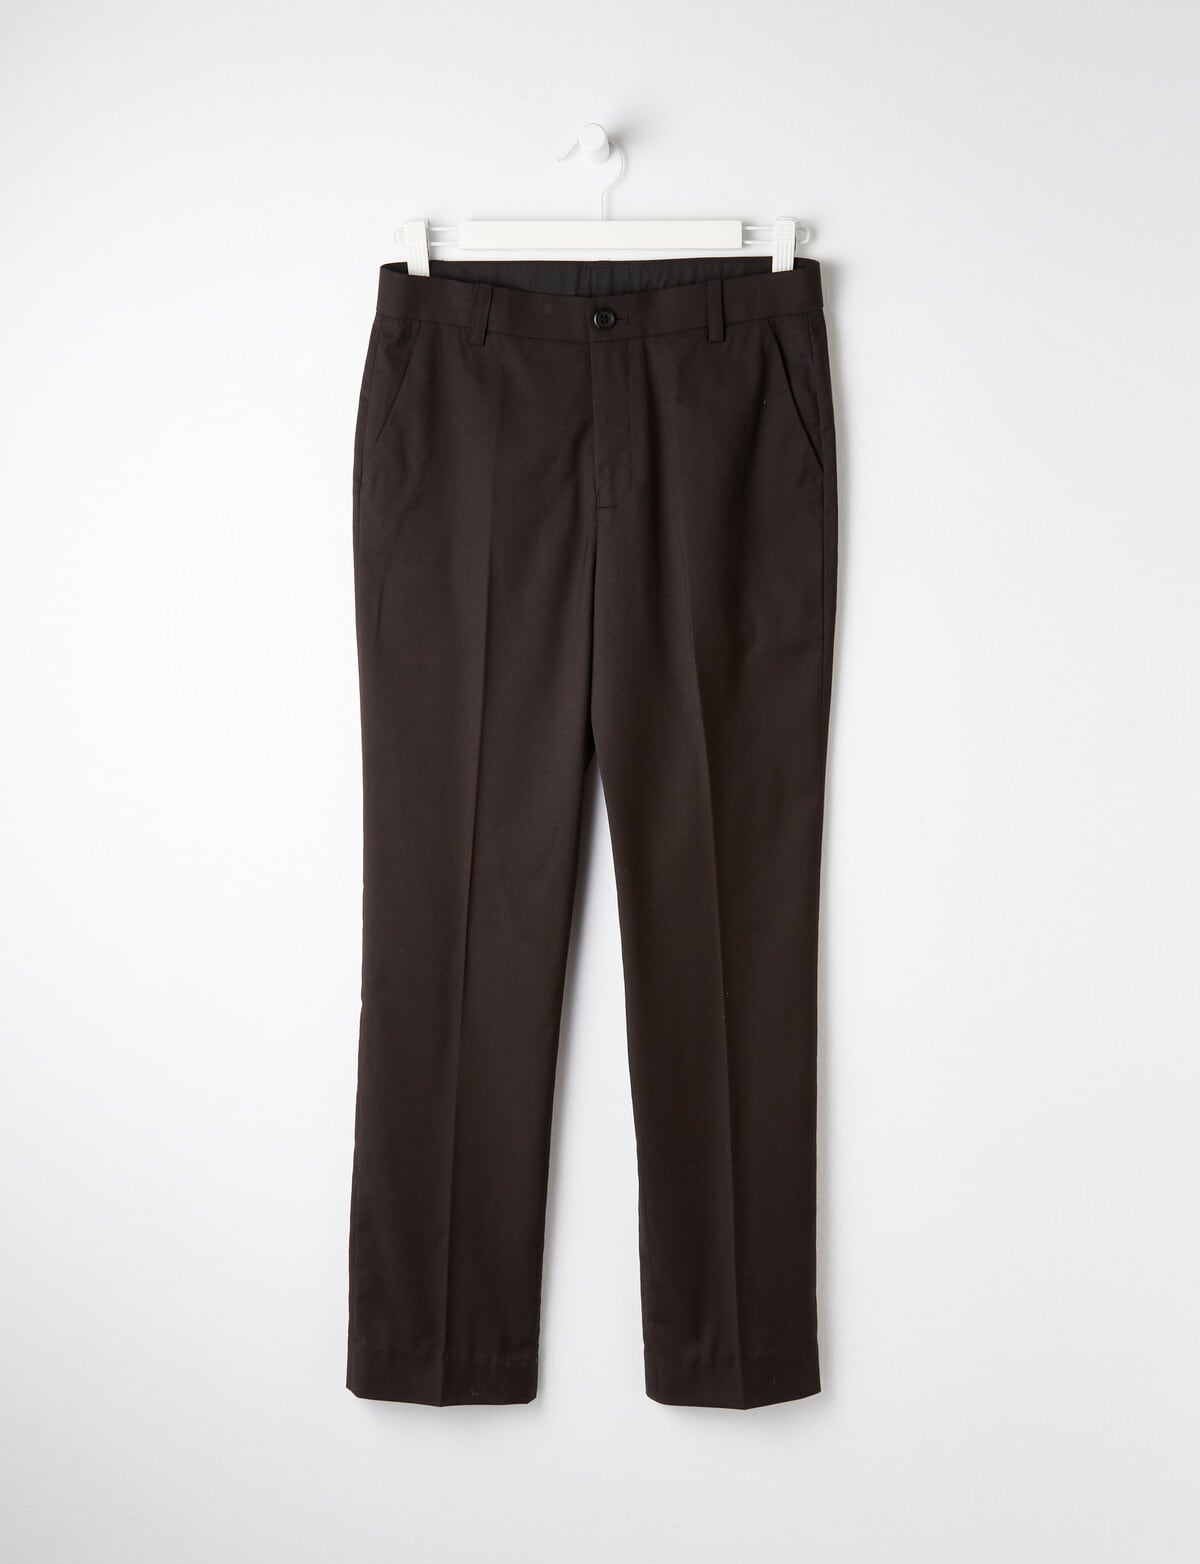 Cotton Mens Formal Pant at Rs 1200 in Delhi | ID: 20022102173